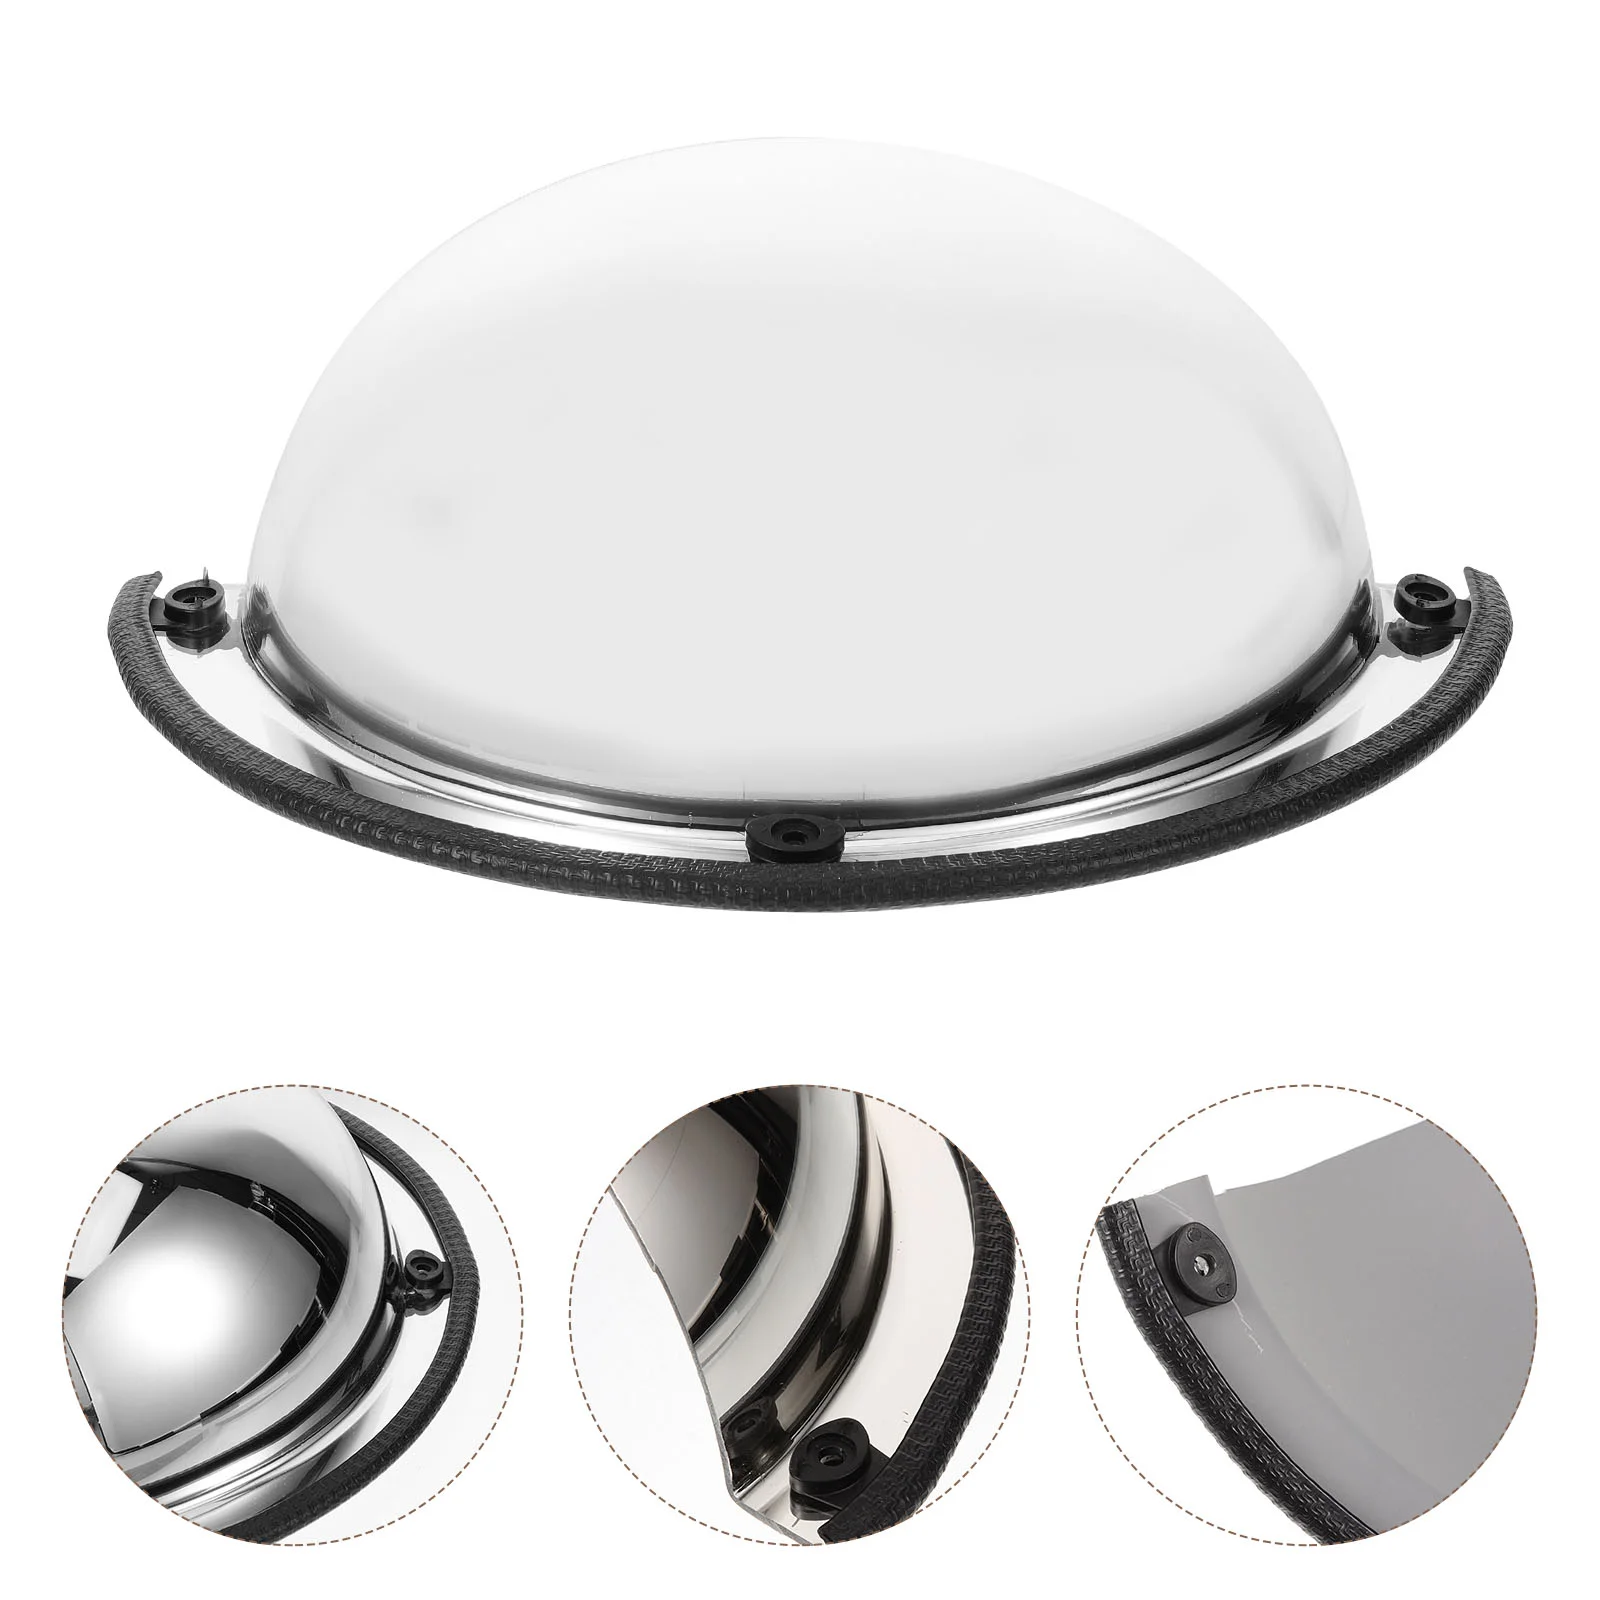 

Mirror Safety Mirrors Convex Anti-theft Blind Corner Acrylic Road Outdoor Traffic Wide-angle Lens Parking Security Garage